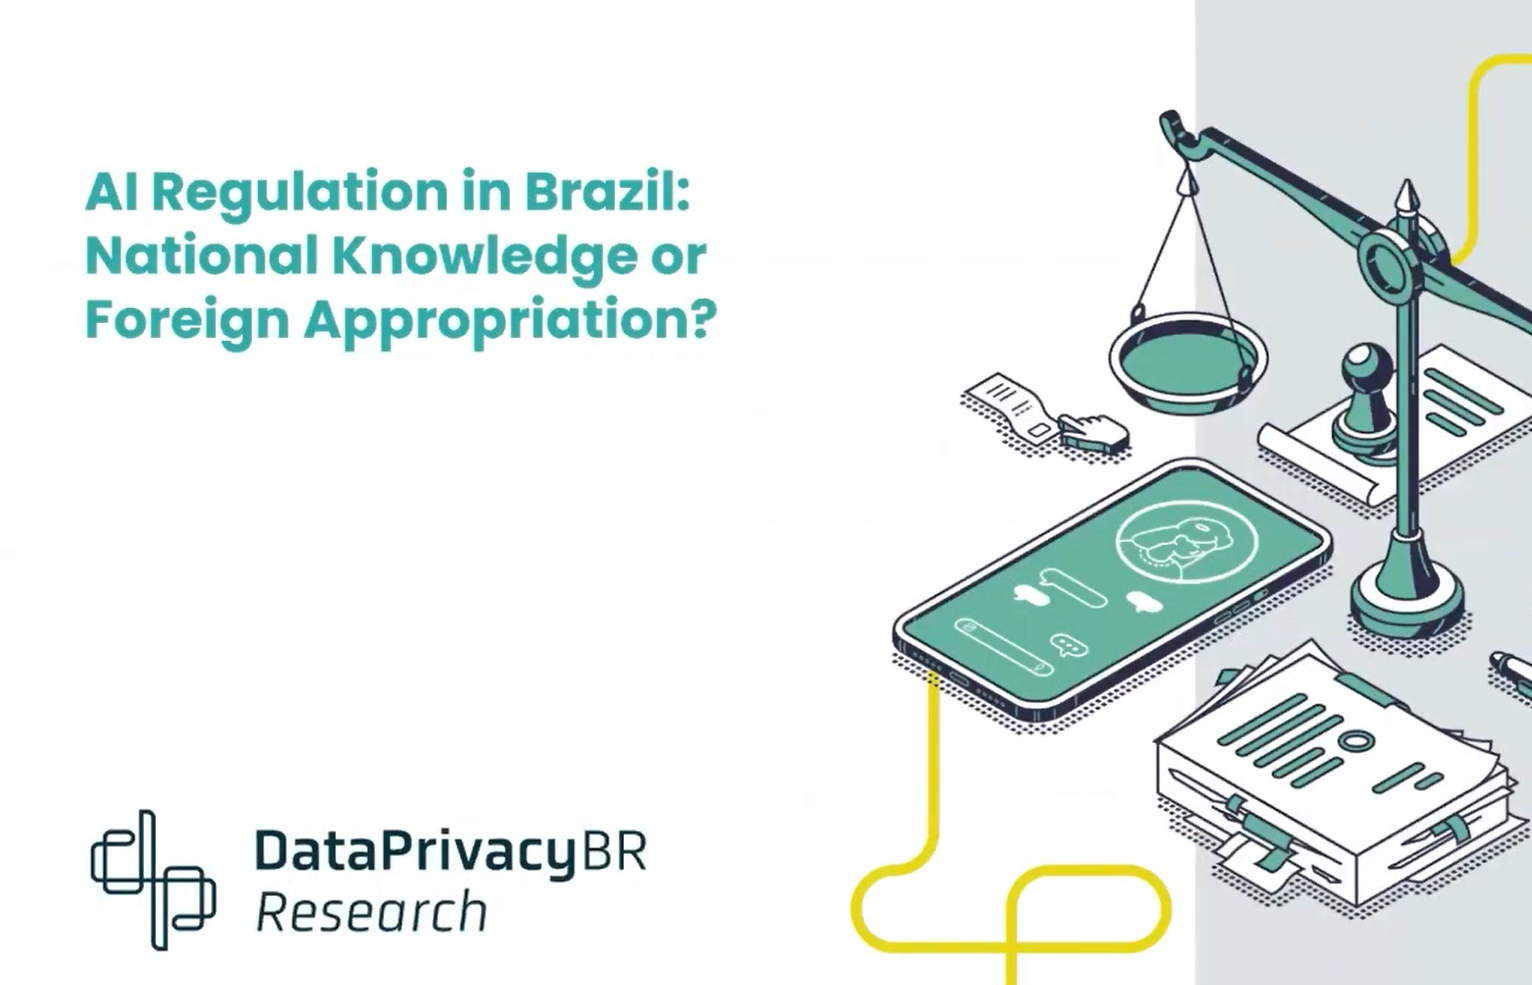 AI Regulation in Brazil: National Knowledge or Foreign Appropriation?